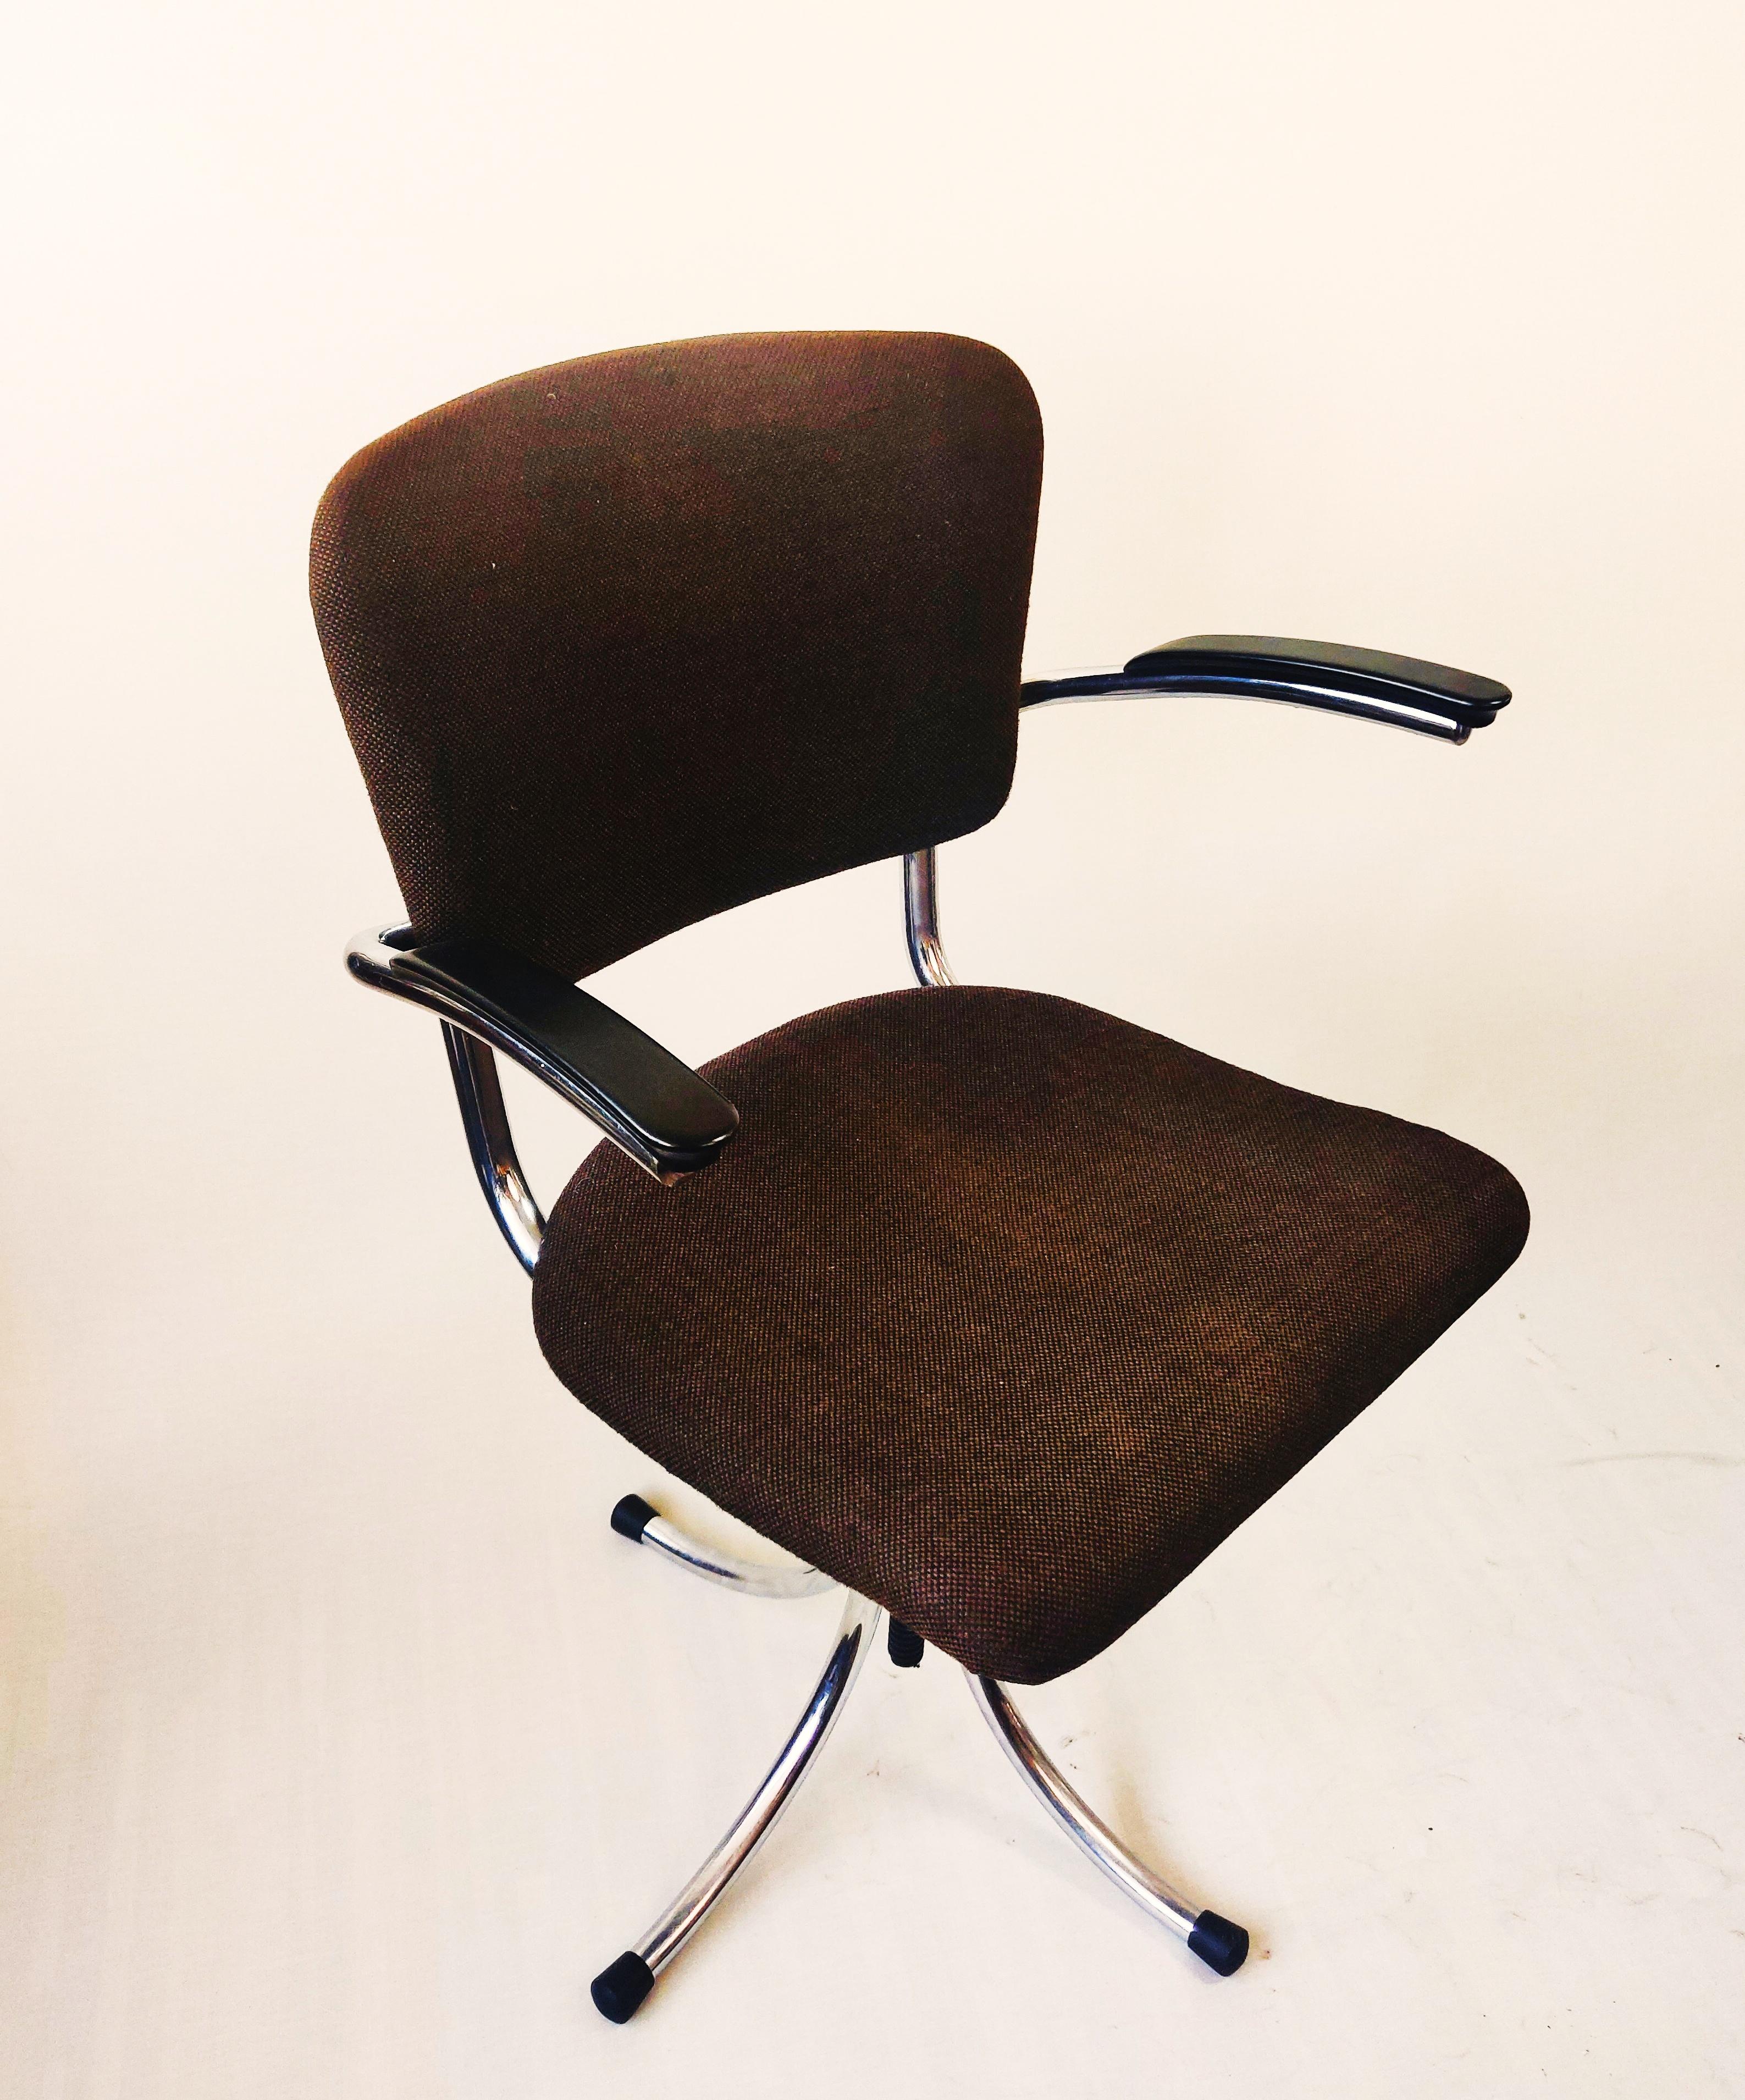 Chair by Paul Schuitema for Fana, Rotterdam, 1960s In Good Condition For Sale In MIJDRECHT, NL